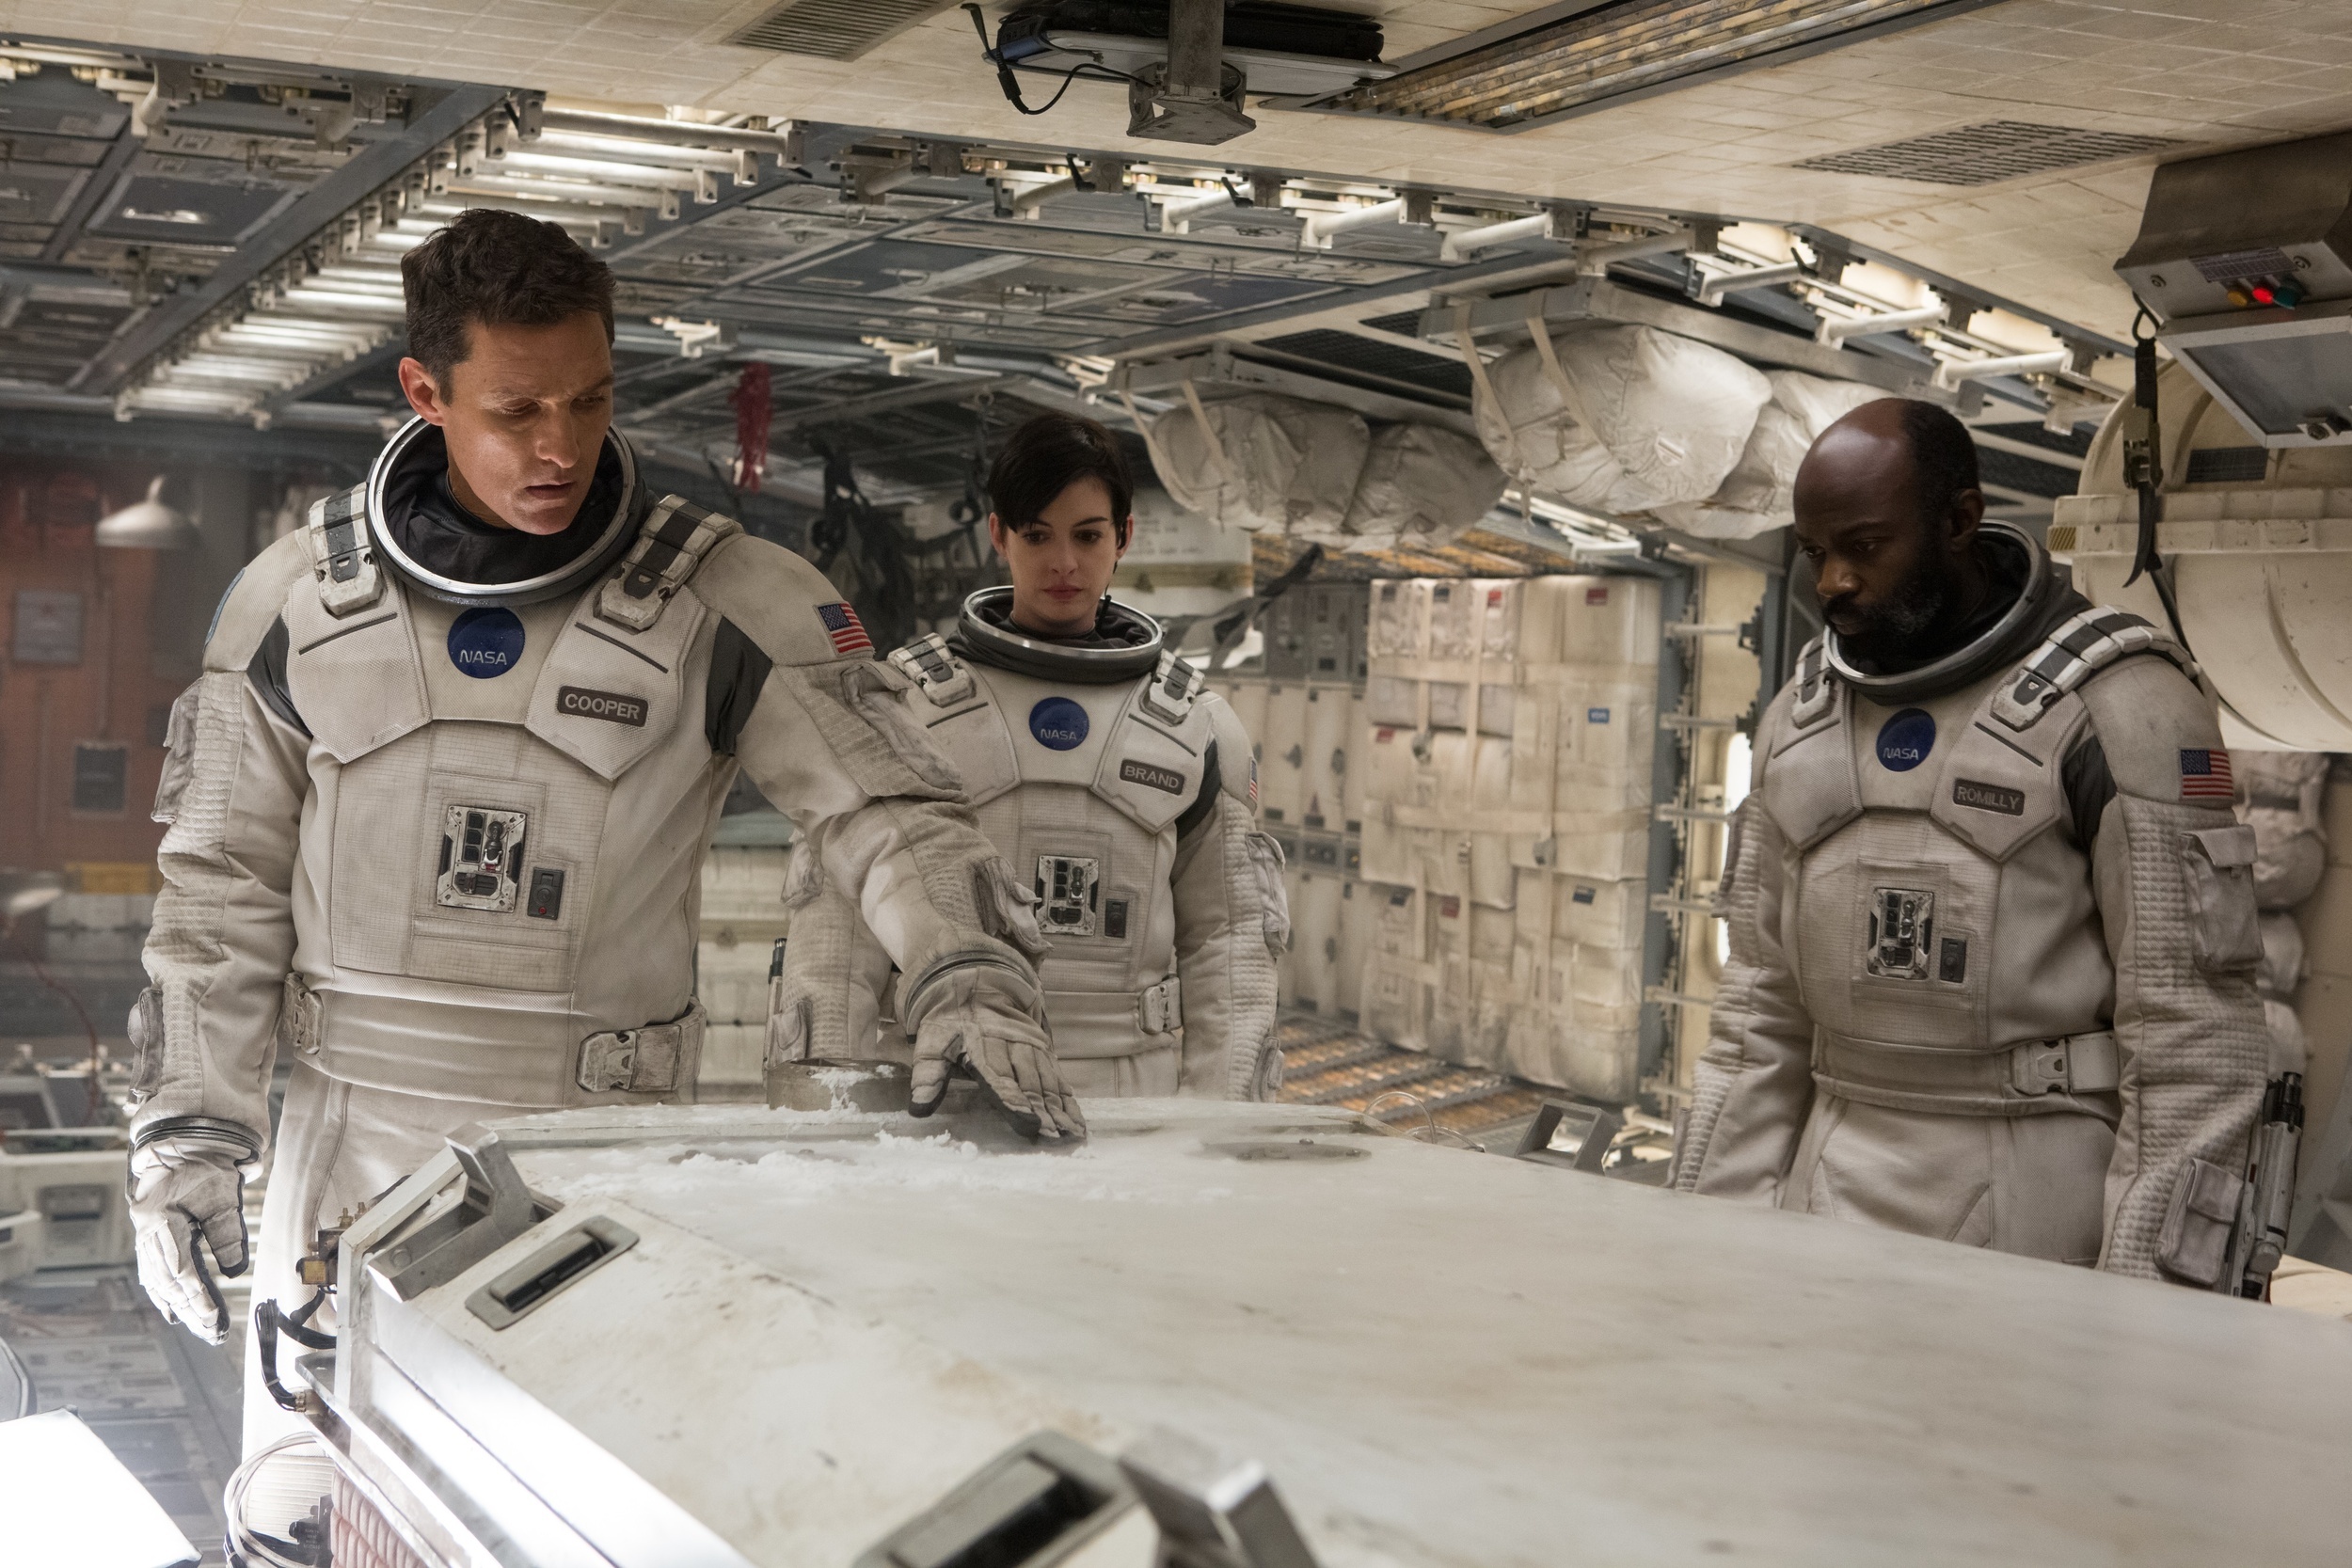 <p>Christopher Nolan loves to mess with time and create notable imagery. <em>Interstellar</em> was daunting even to people who watched <em>Inception</em>, as much for its lengthy run time as its heady plot. That being said, it delved headlong into a scientific notion of time travel, and the cast is also quite impressive. Time has been kind to the reputation of<em> Interstellar</em>.</p><p><a href='https://www.msn.com/en-us/community/channel/vid-cj9pqbr0vn9in2b6ddcd8sfgpfq6x6utp44fssrv6mc2gtybw0us'>Follow us on MSN to see more of our exclusive entertainment content.</a></p>